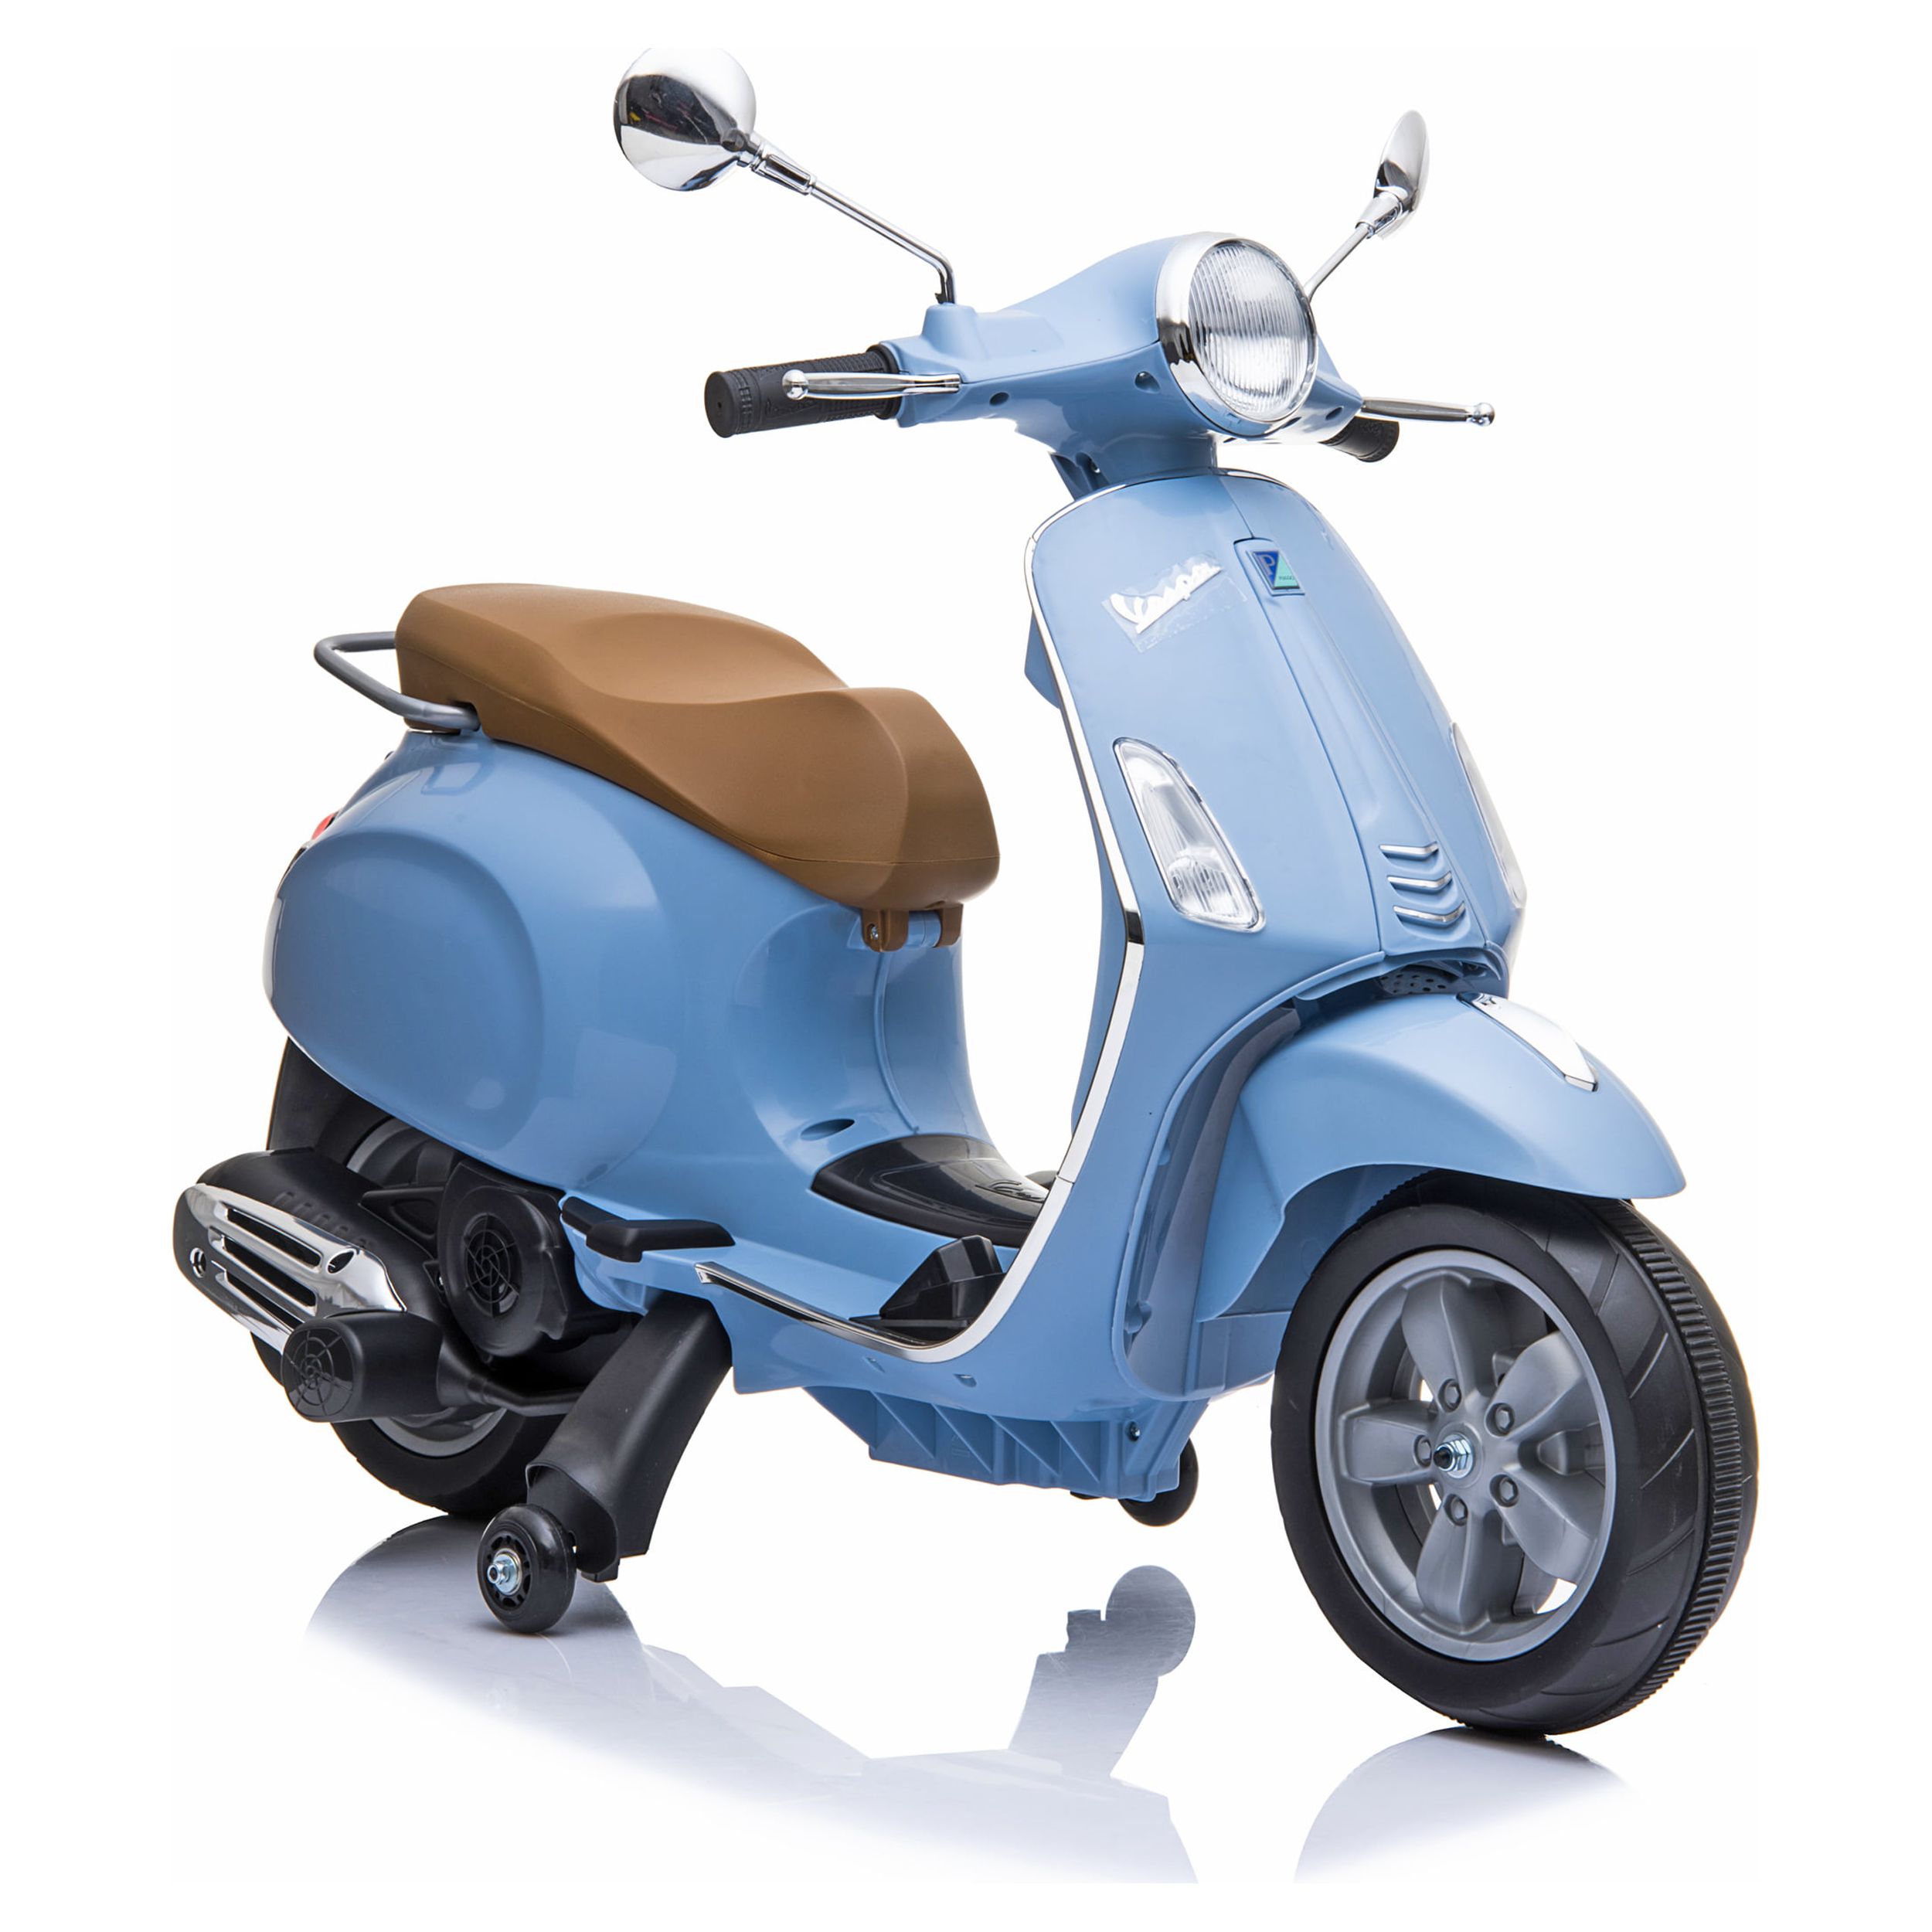 Blazin' Wheels 12V Vespa GTS Super Sport Battery Operated Rideon Scooter - Unisex Toy - image 2 of 9